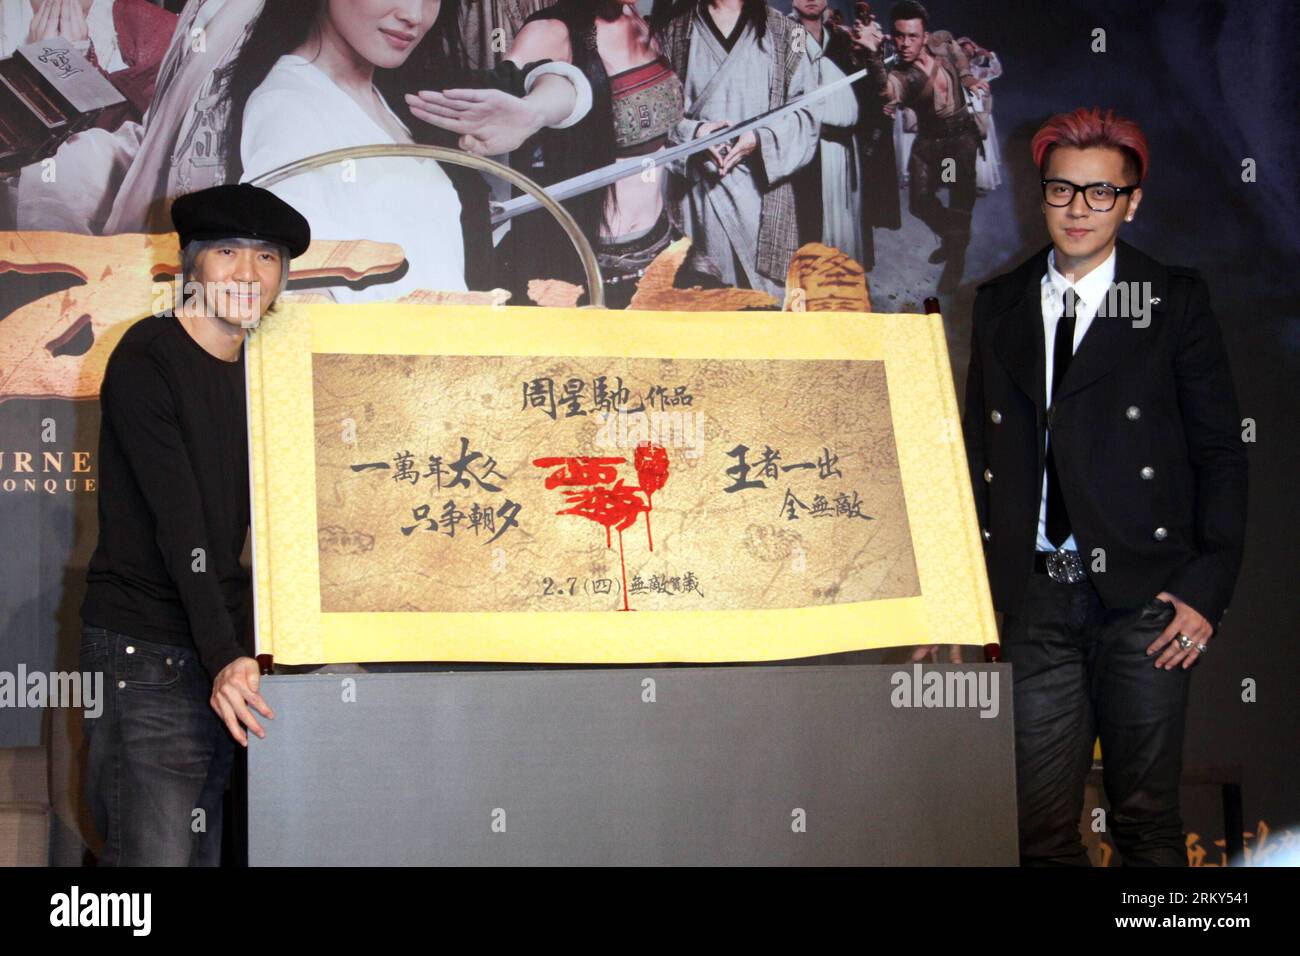 Bildnummer: 59146052  Datum: 28.01.2013  Copyright: imago/Xinhua (130128) -- TAIPEI, Jan. 28, 2013 (Xinhua) -- Director Stephen Chow (L) and actor Show Lo pose for photo during a press conference of the movie Journey to the West: Conquering the Demons in Taipei, southeast China s Taiwan, Jan. 28, 2013. The movie is expected to hit the screen on Feb. 7, 2013 in Taipei. (Xinhua) (mp) CHINA-TAIPEI-MOVIE-PRESS CONFERENCE (CN) PUBLICATIONxNOTxINxCHN Entertainment Kultur People PK Film Premiere Filmpremiere Die Reise nach Westen x0x xdd 2013 quer premiumd      59146052 Date 28 01 2013 Copyright Imag Stock Photo